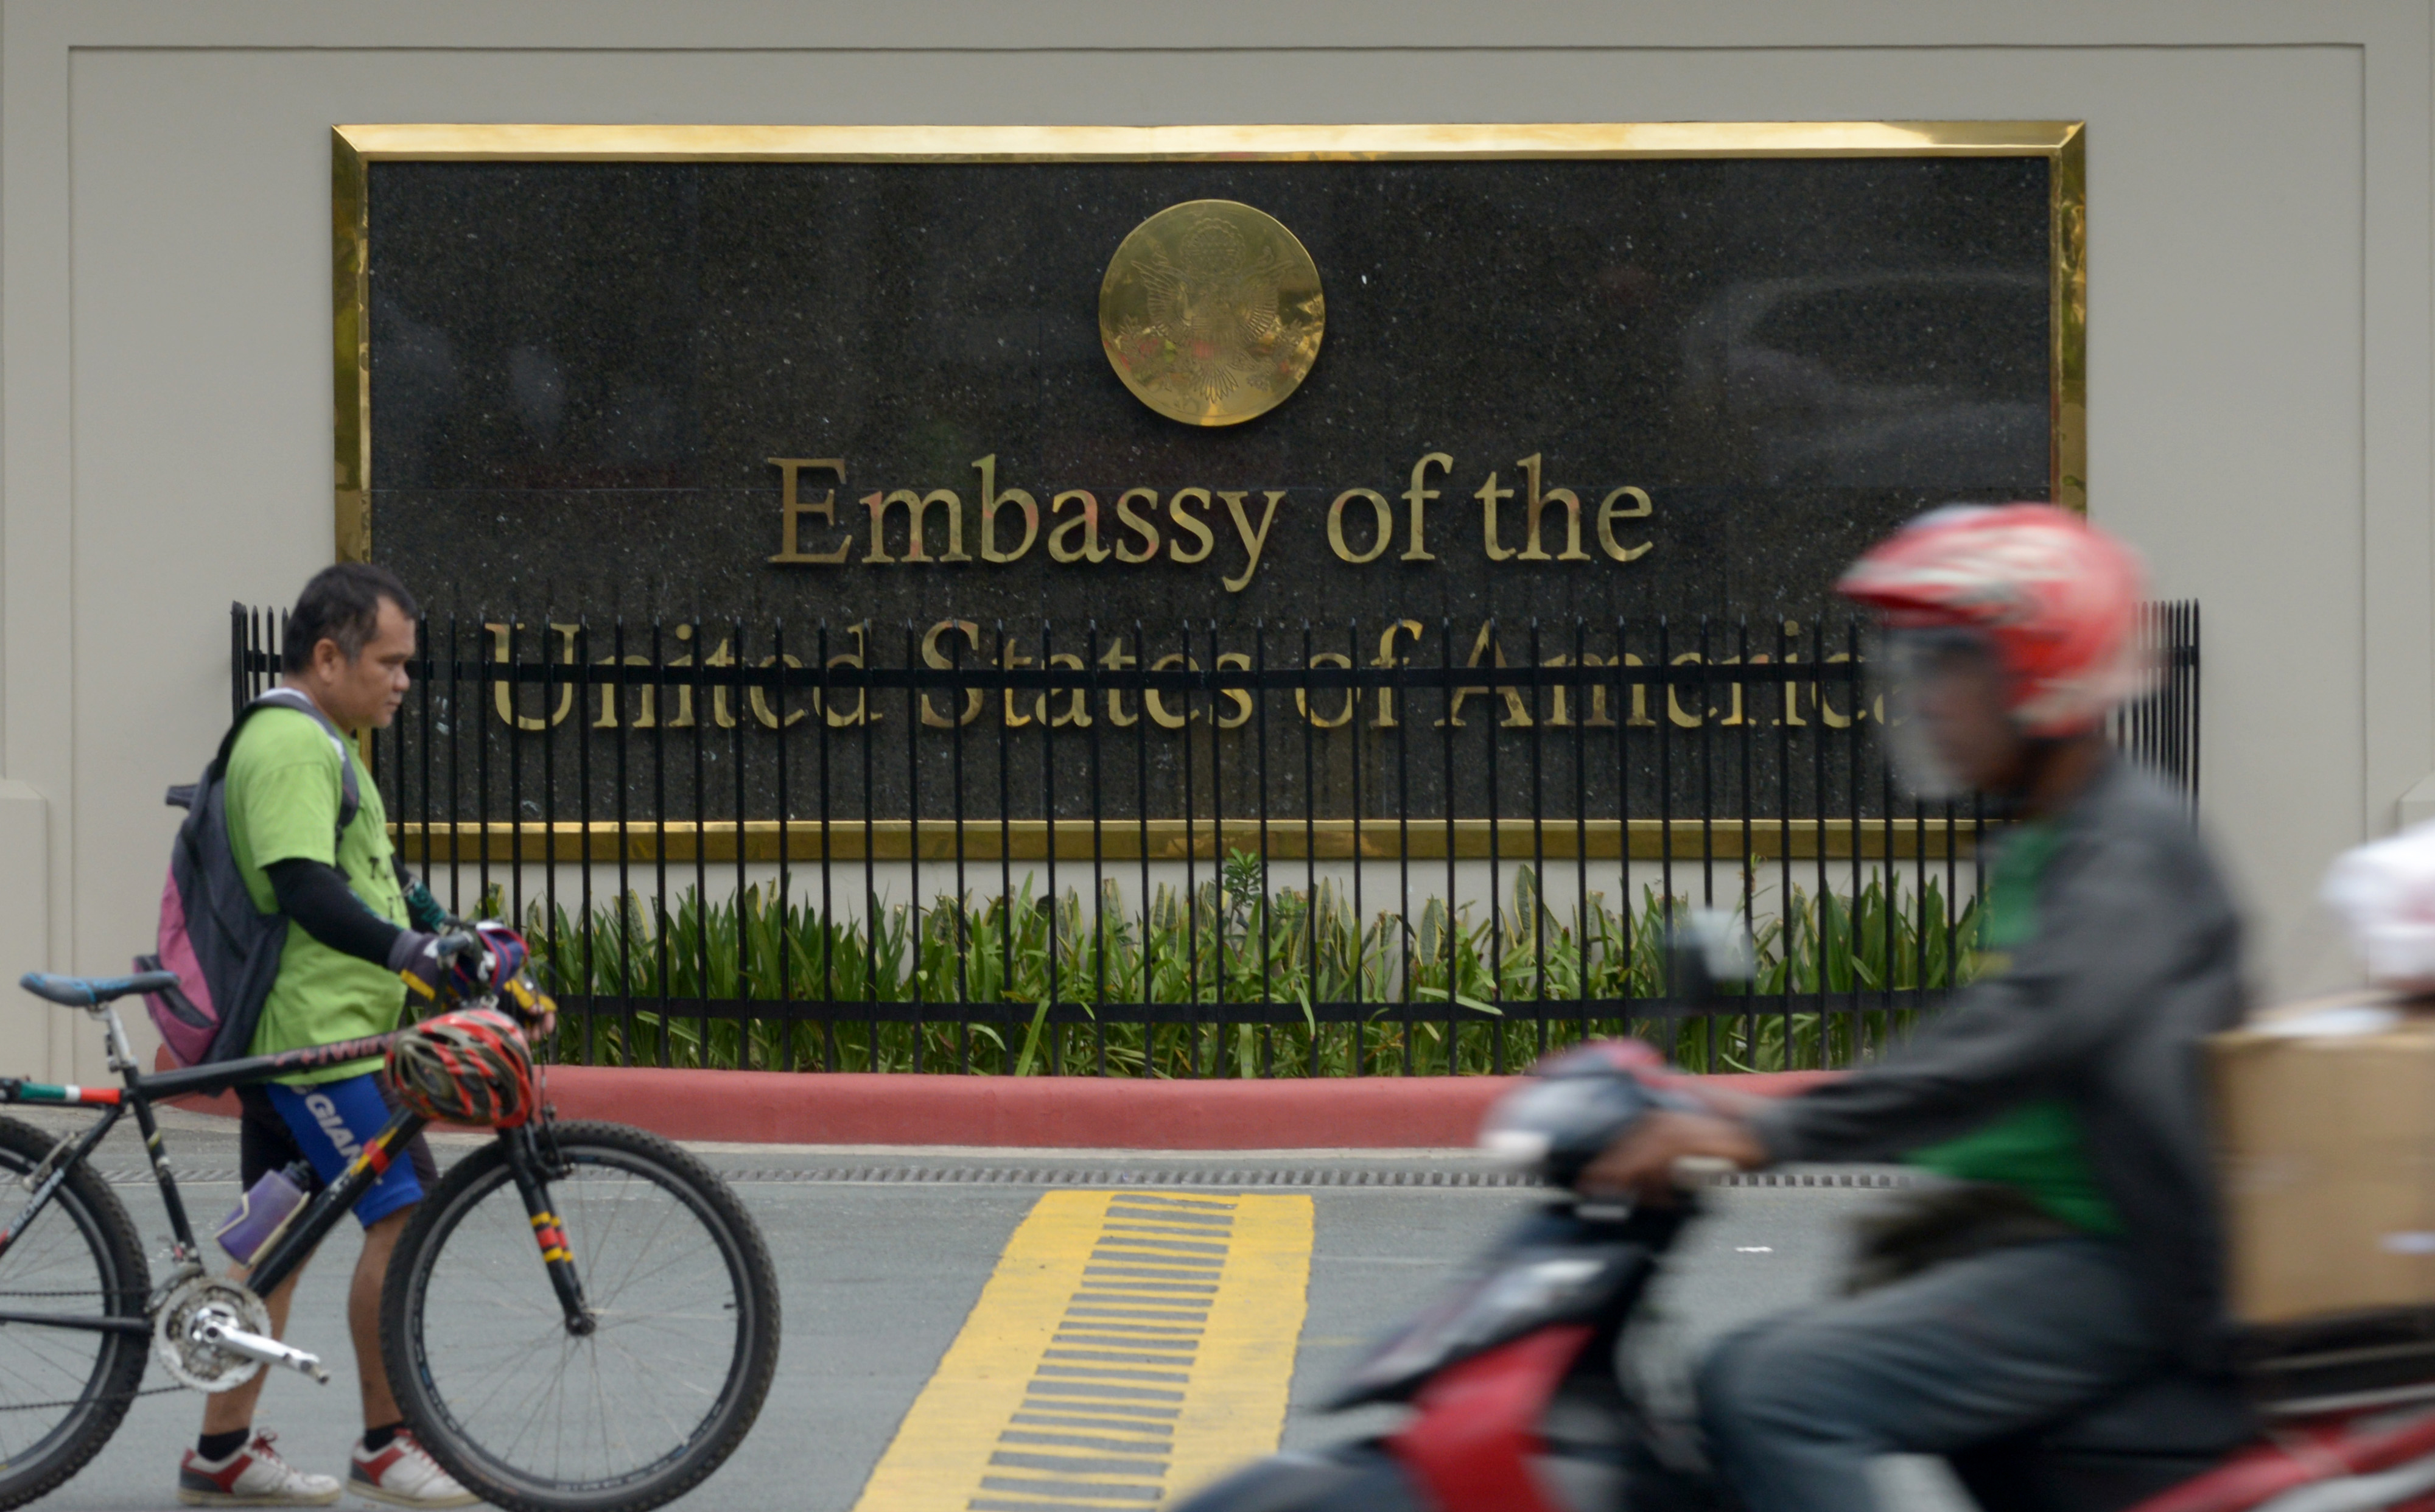 Commuters pass in front of the highly-secured US embassy in Manila on July 6, 2013. The United States issued a warning against travel to the southern Philippines, the embassy said, just days after Australia and Canada issued a similar advisory to their citizens, citing threats from criminal gangs and terrorist groups in the south, but not specifying any threat.   AFP PHOTO / Jay DIRECTO / AFP PHOTO / JAY DIRECTO